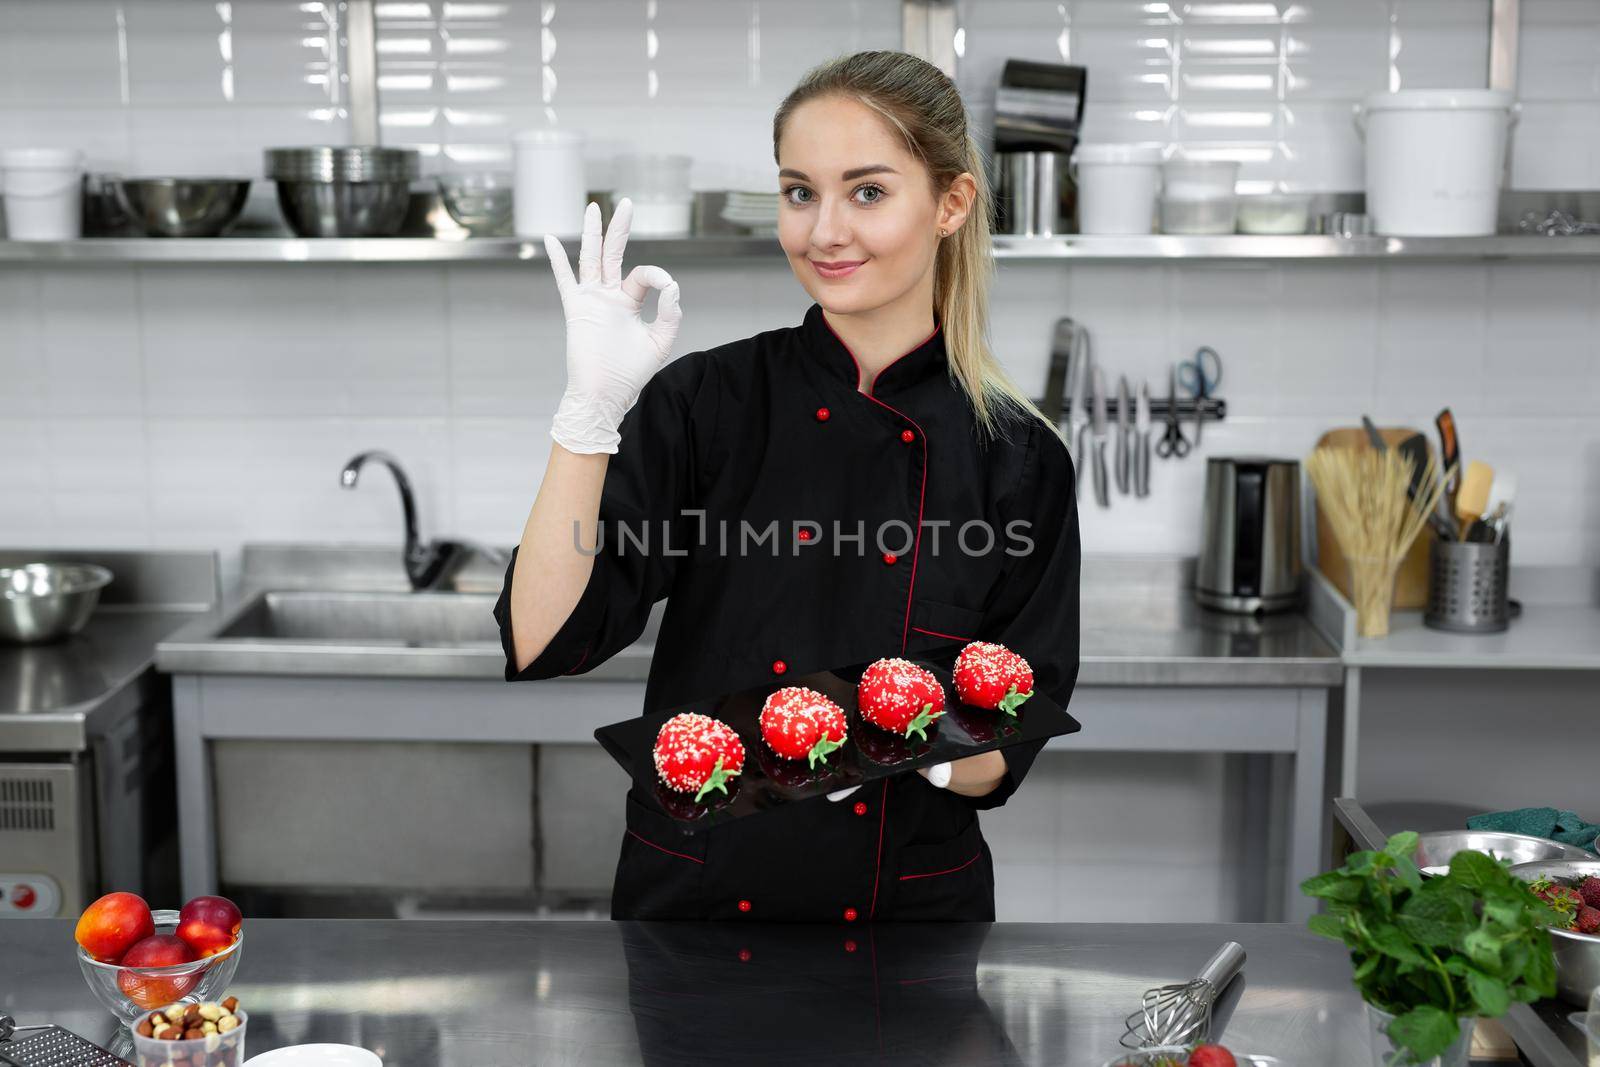 The pastry chef holds a tray with mass cakes, smiles and shows the sign ok